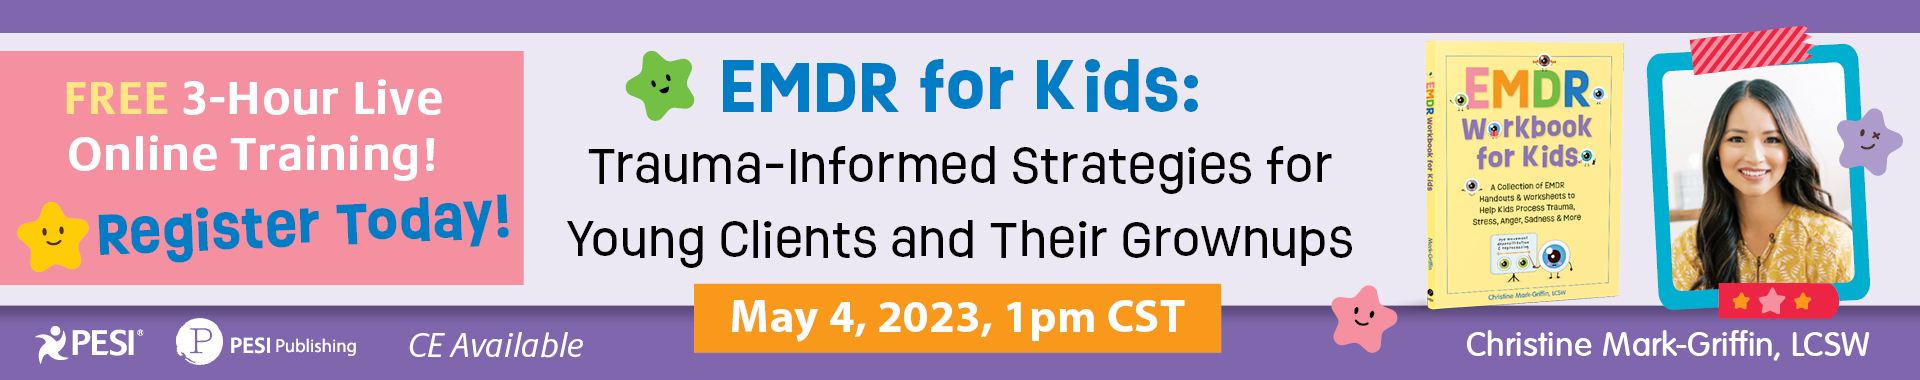 EMDR for Kids: Trauma-Informed Strategies for Young Clients and Their Grownups